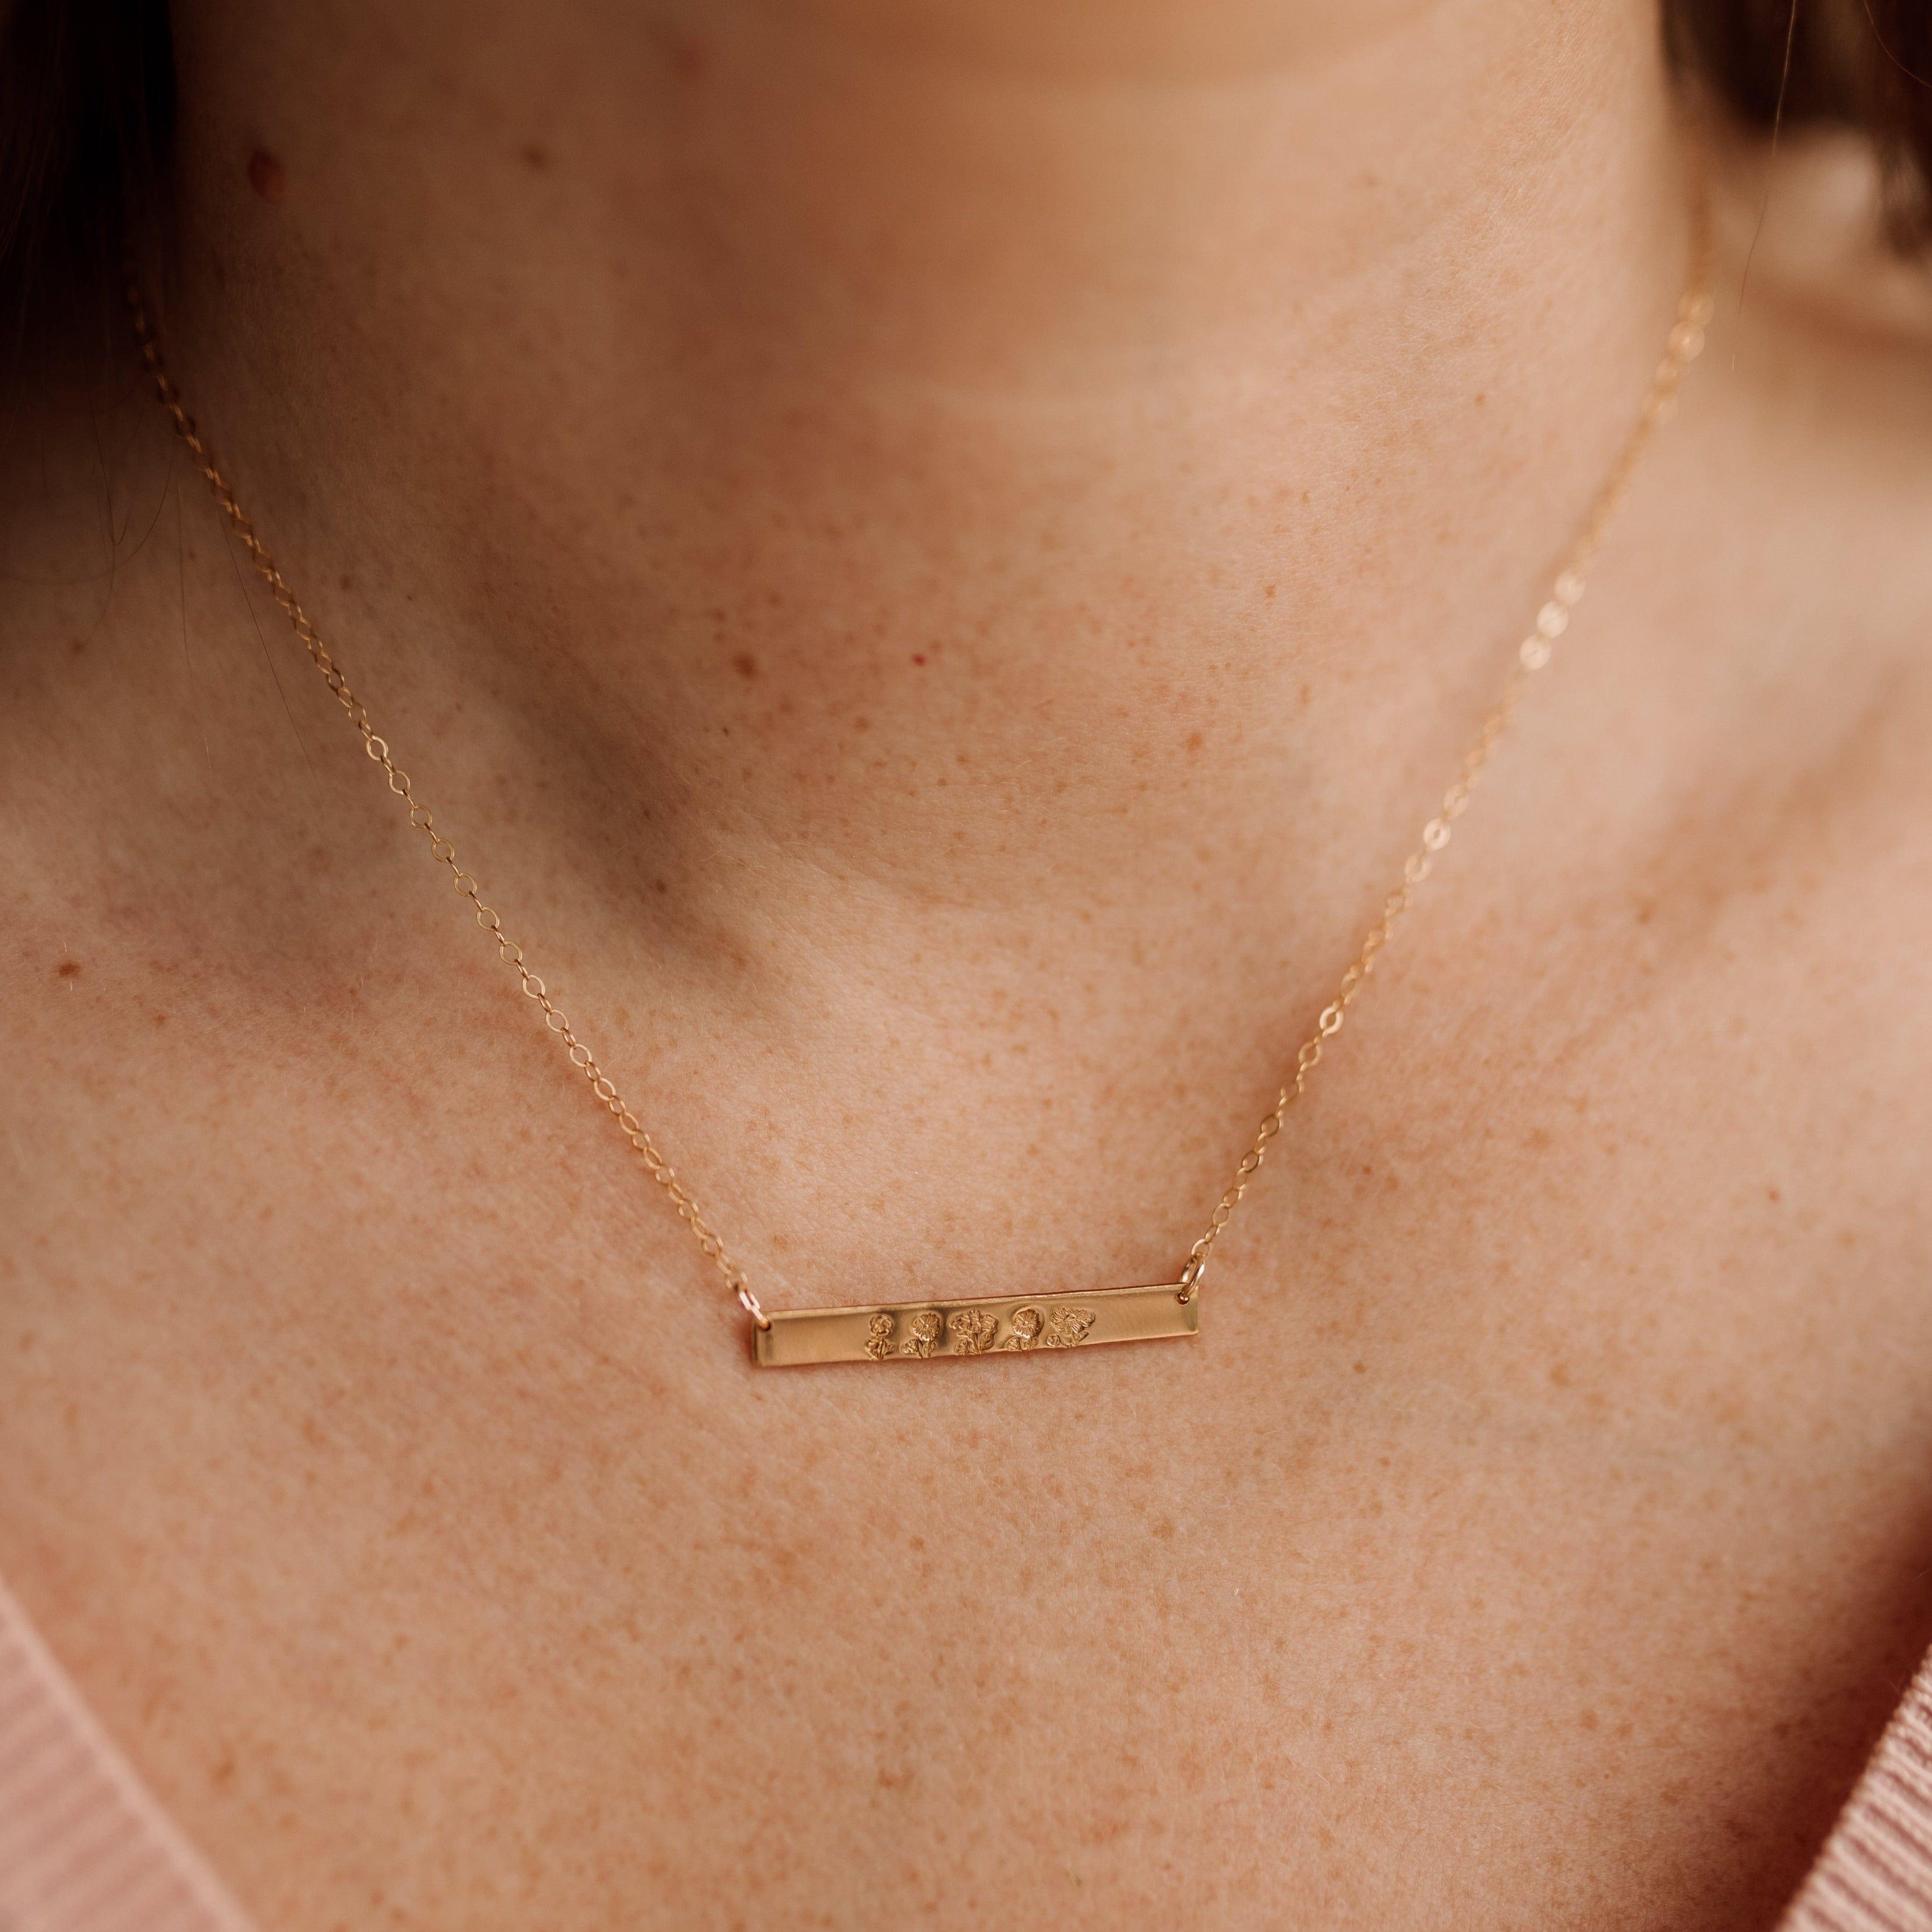 Family Garden Bar Necklace - Nolia Jewelry - Meaningful + Sustainably Handcrafted Jewelry